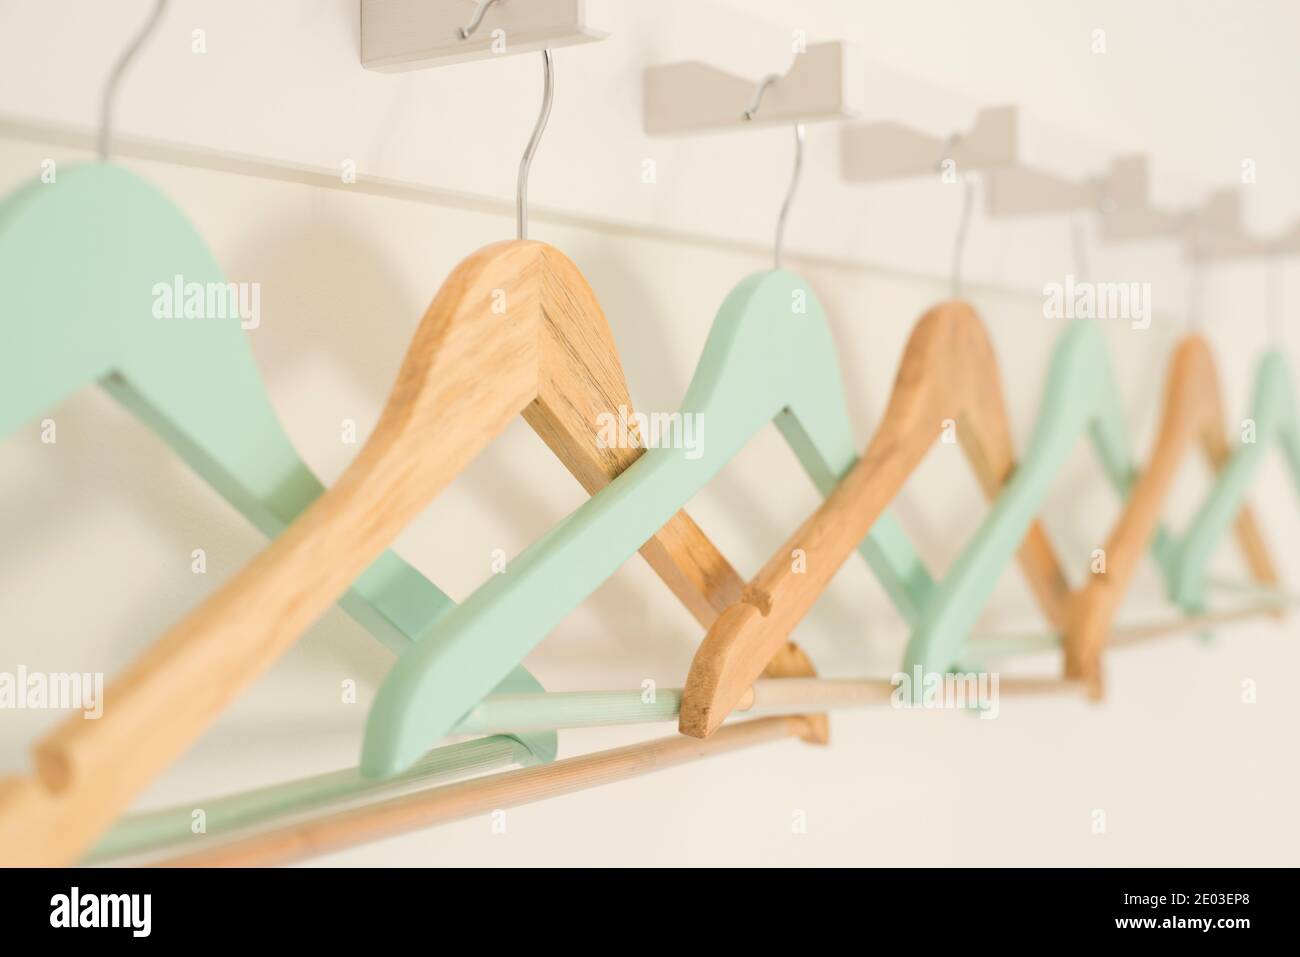 Plain and painted wooden coat hangers hanging from a row of hooks Stock Photo